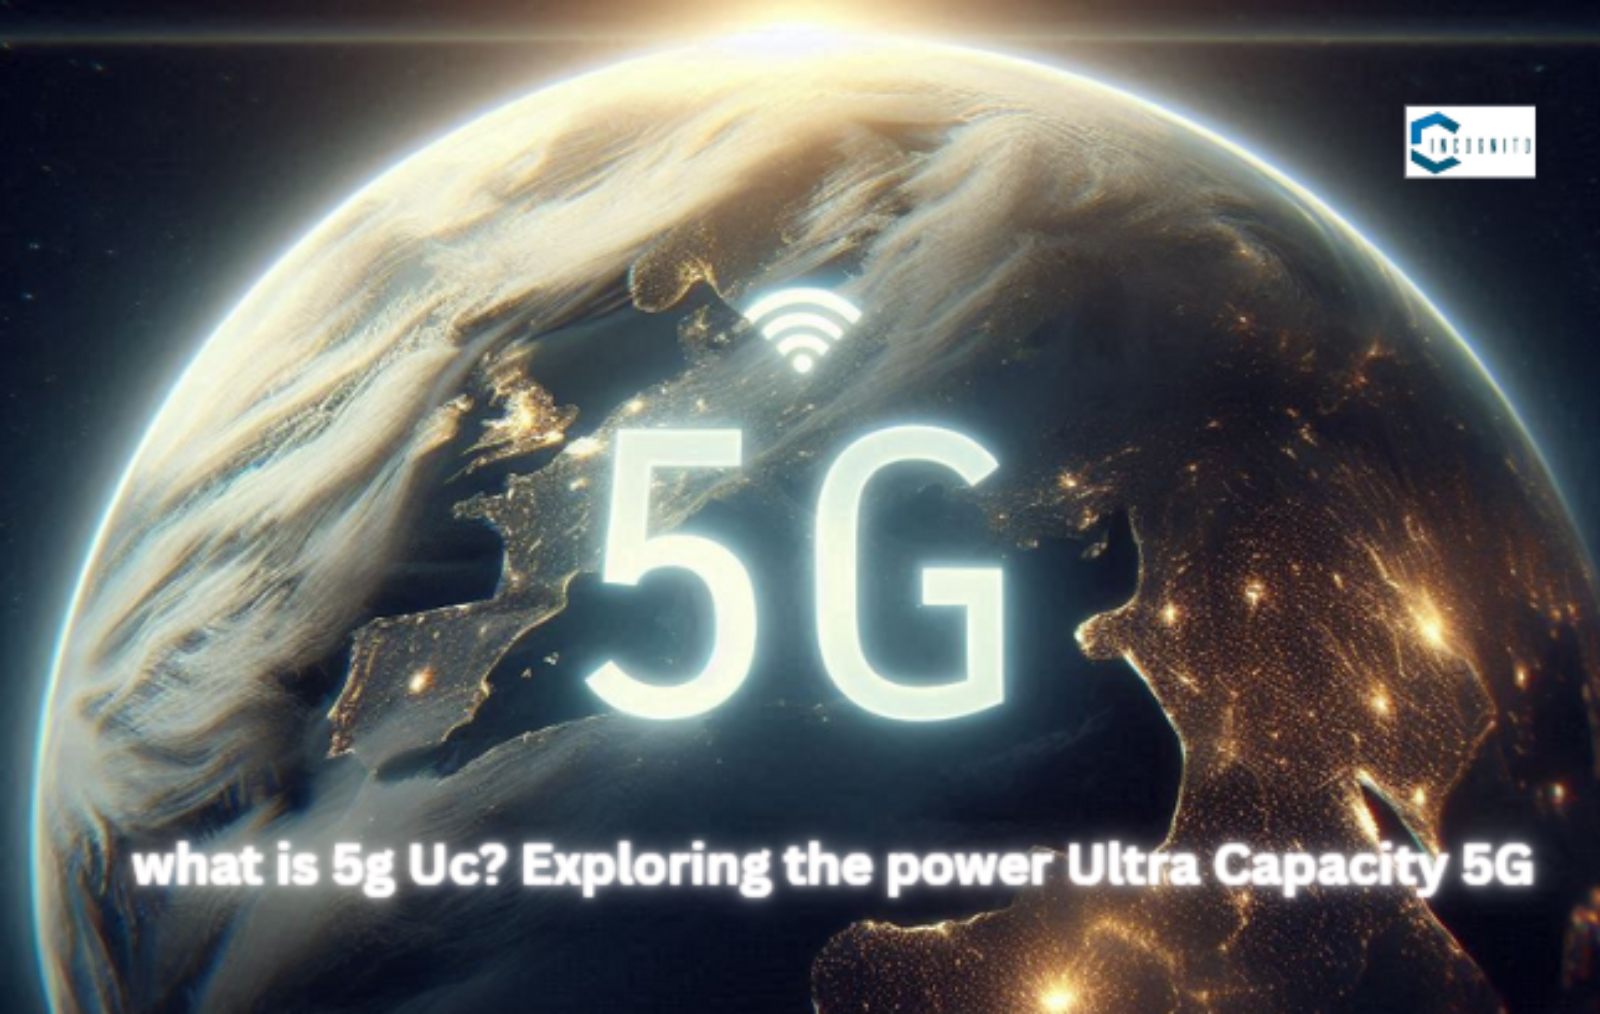 What is 5G UC? Exploring the Power of Ultra Capacity 5G